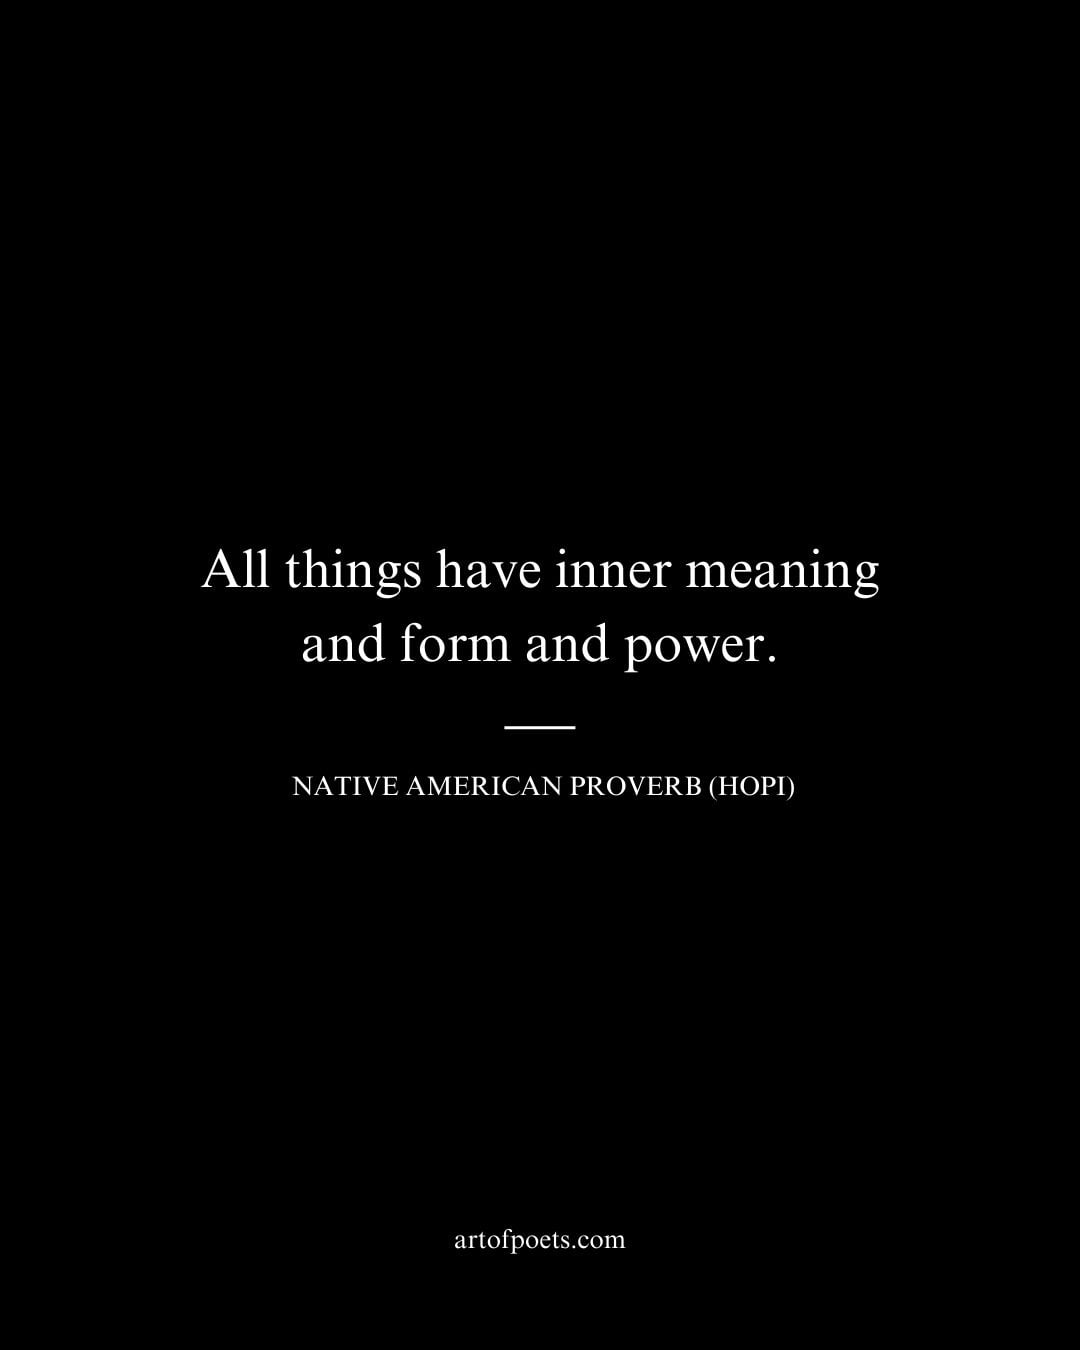 All things have inner meaning and form and power